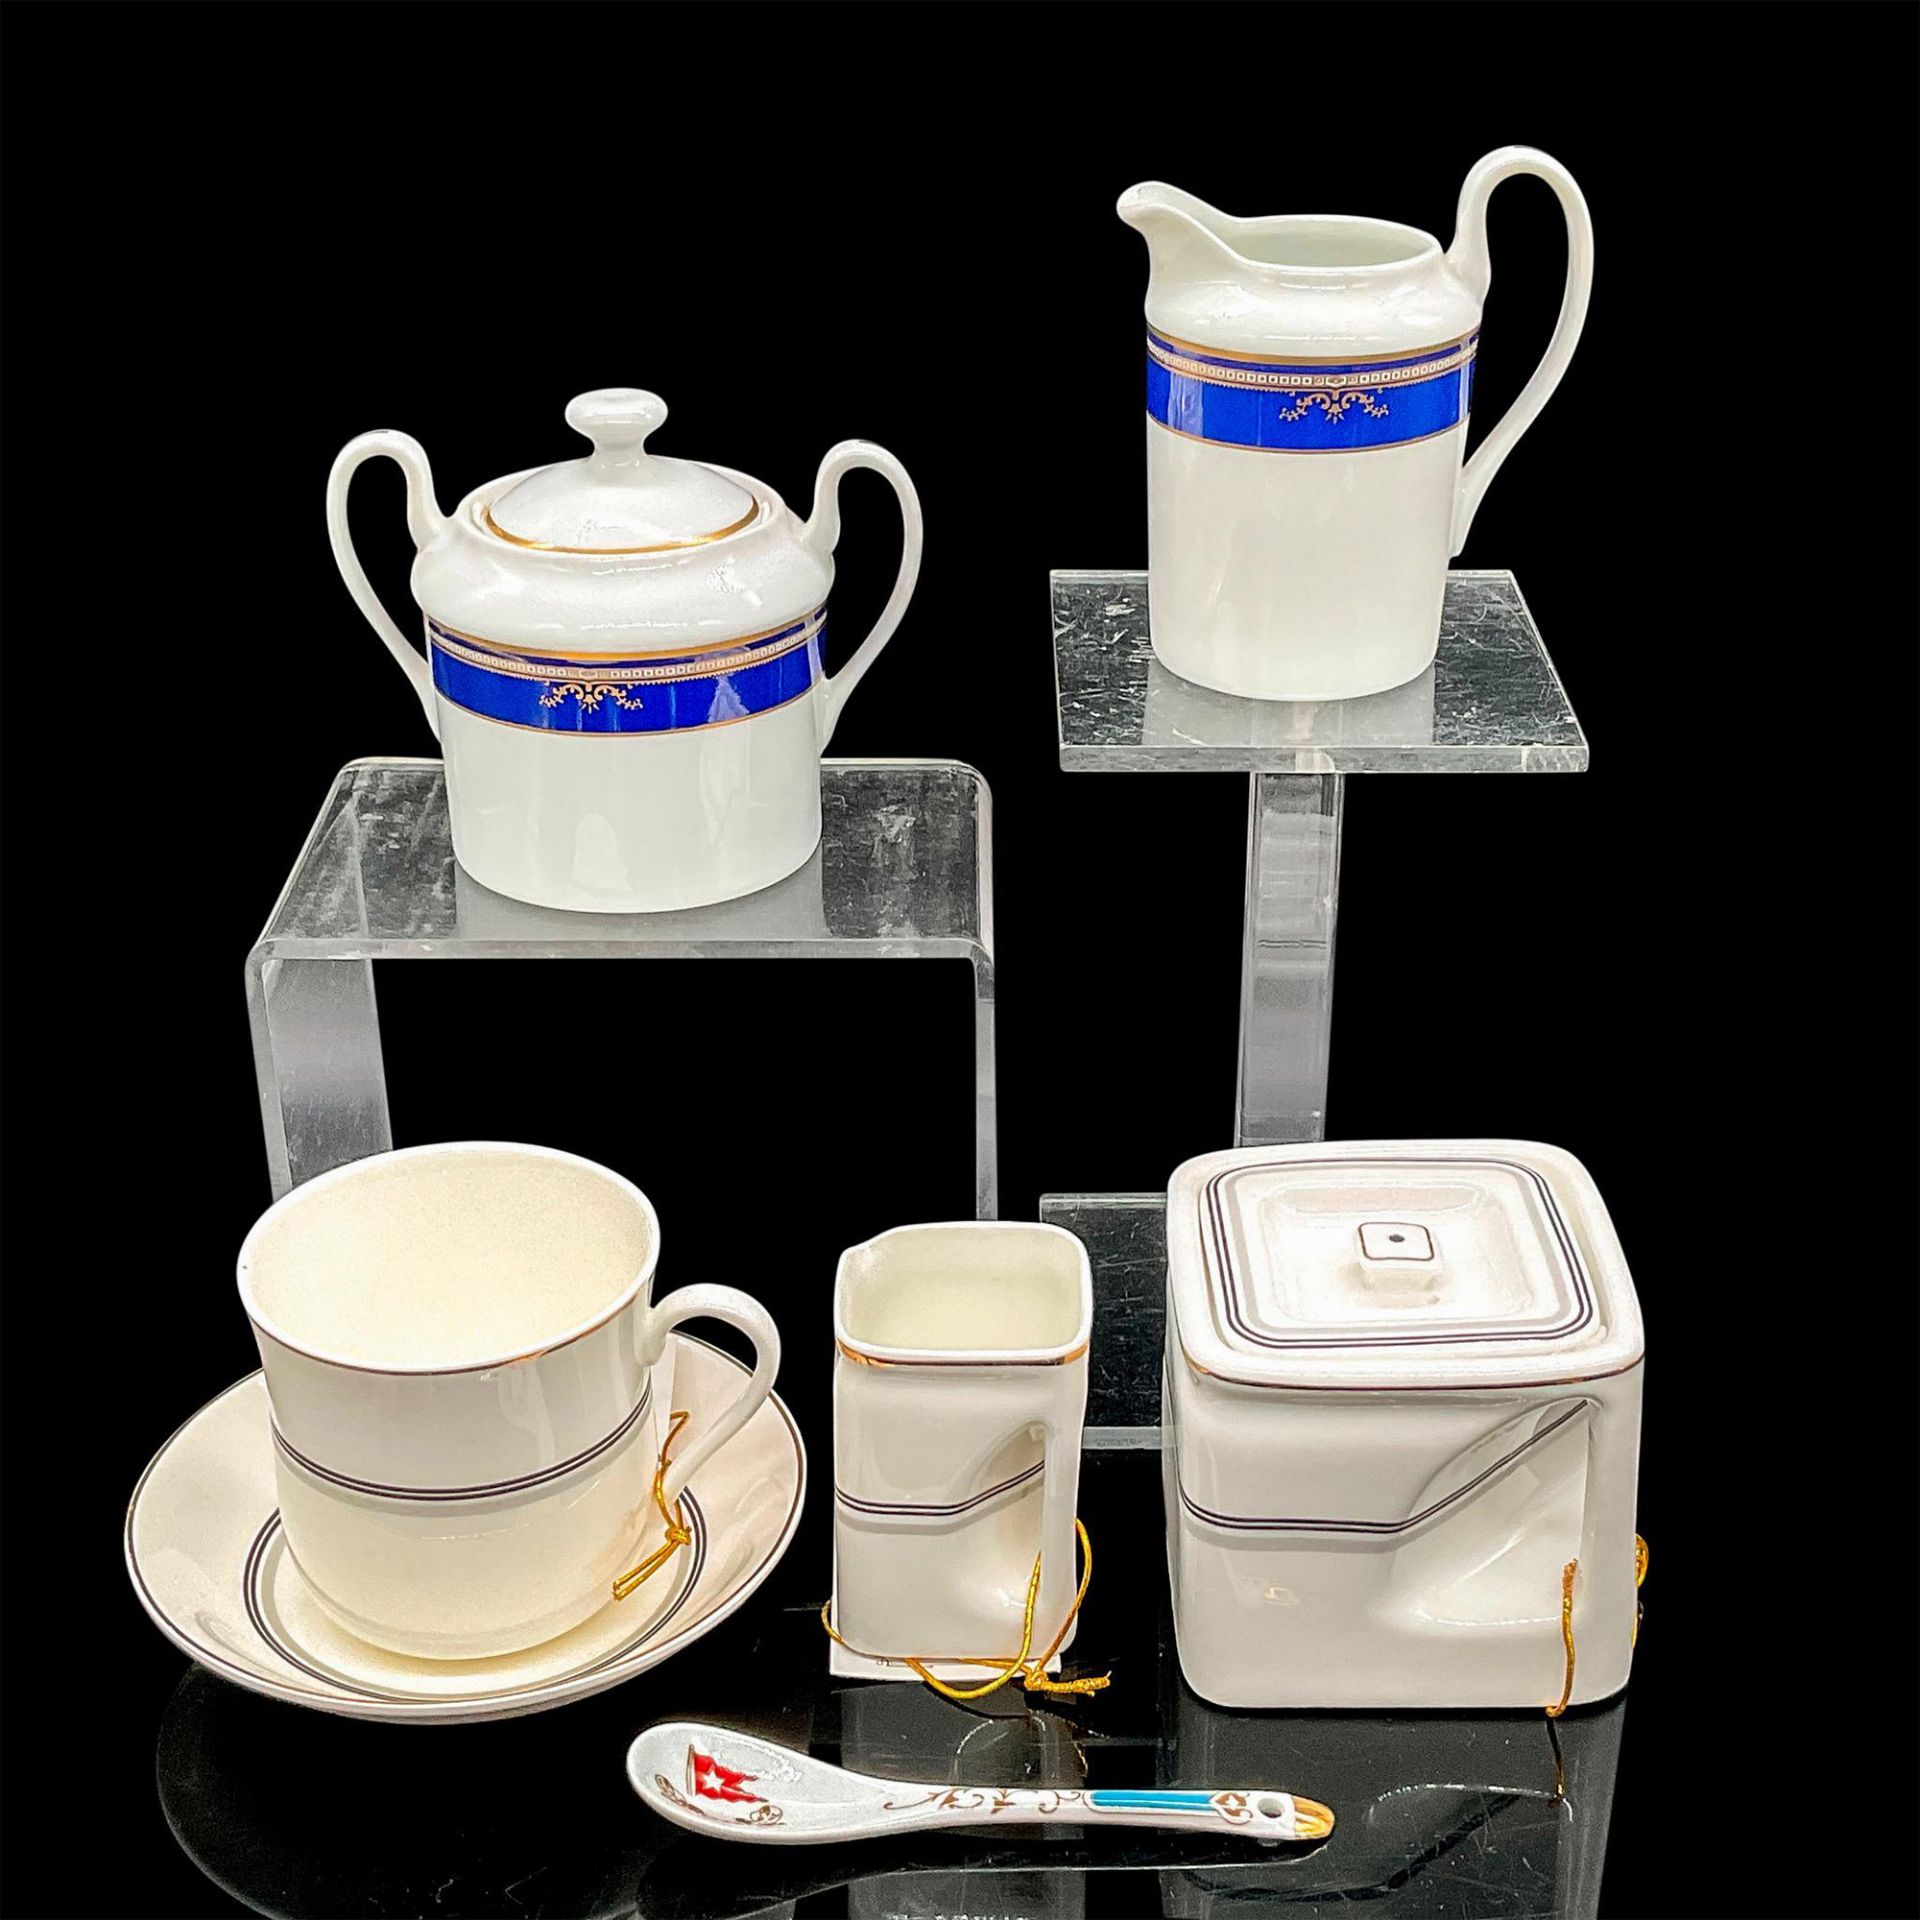 6pc Tea Serving Set, Queen Mary and Titanic Replicas - Image 9 of 16